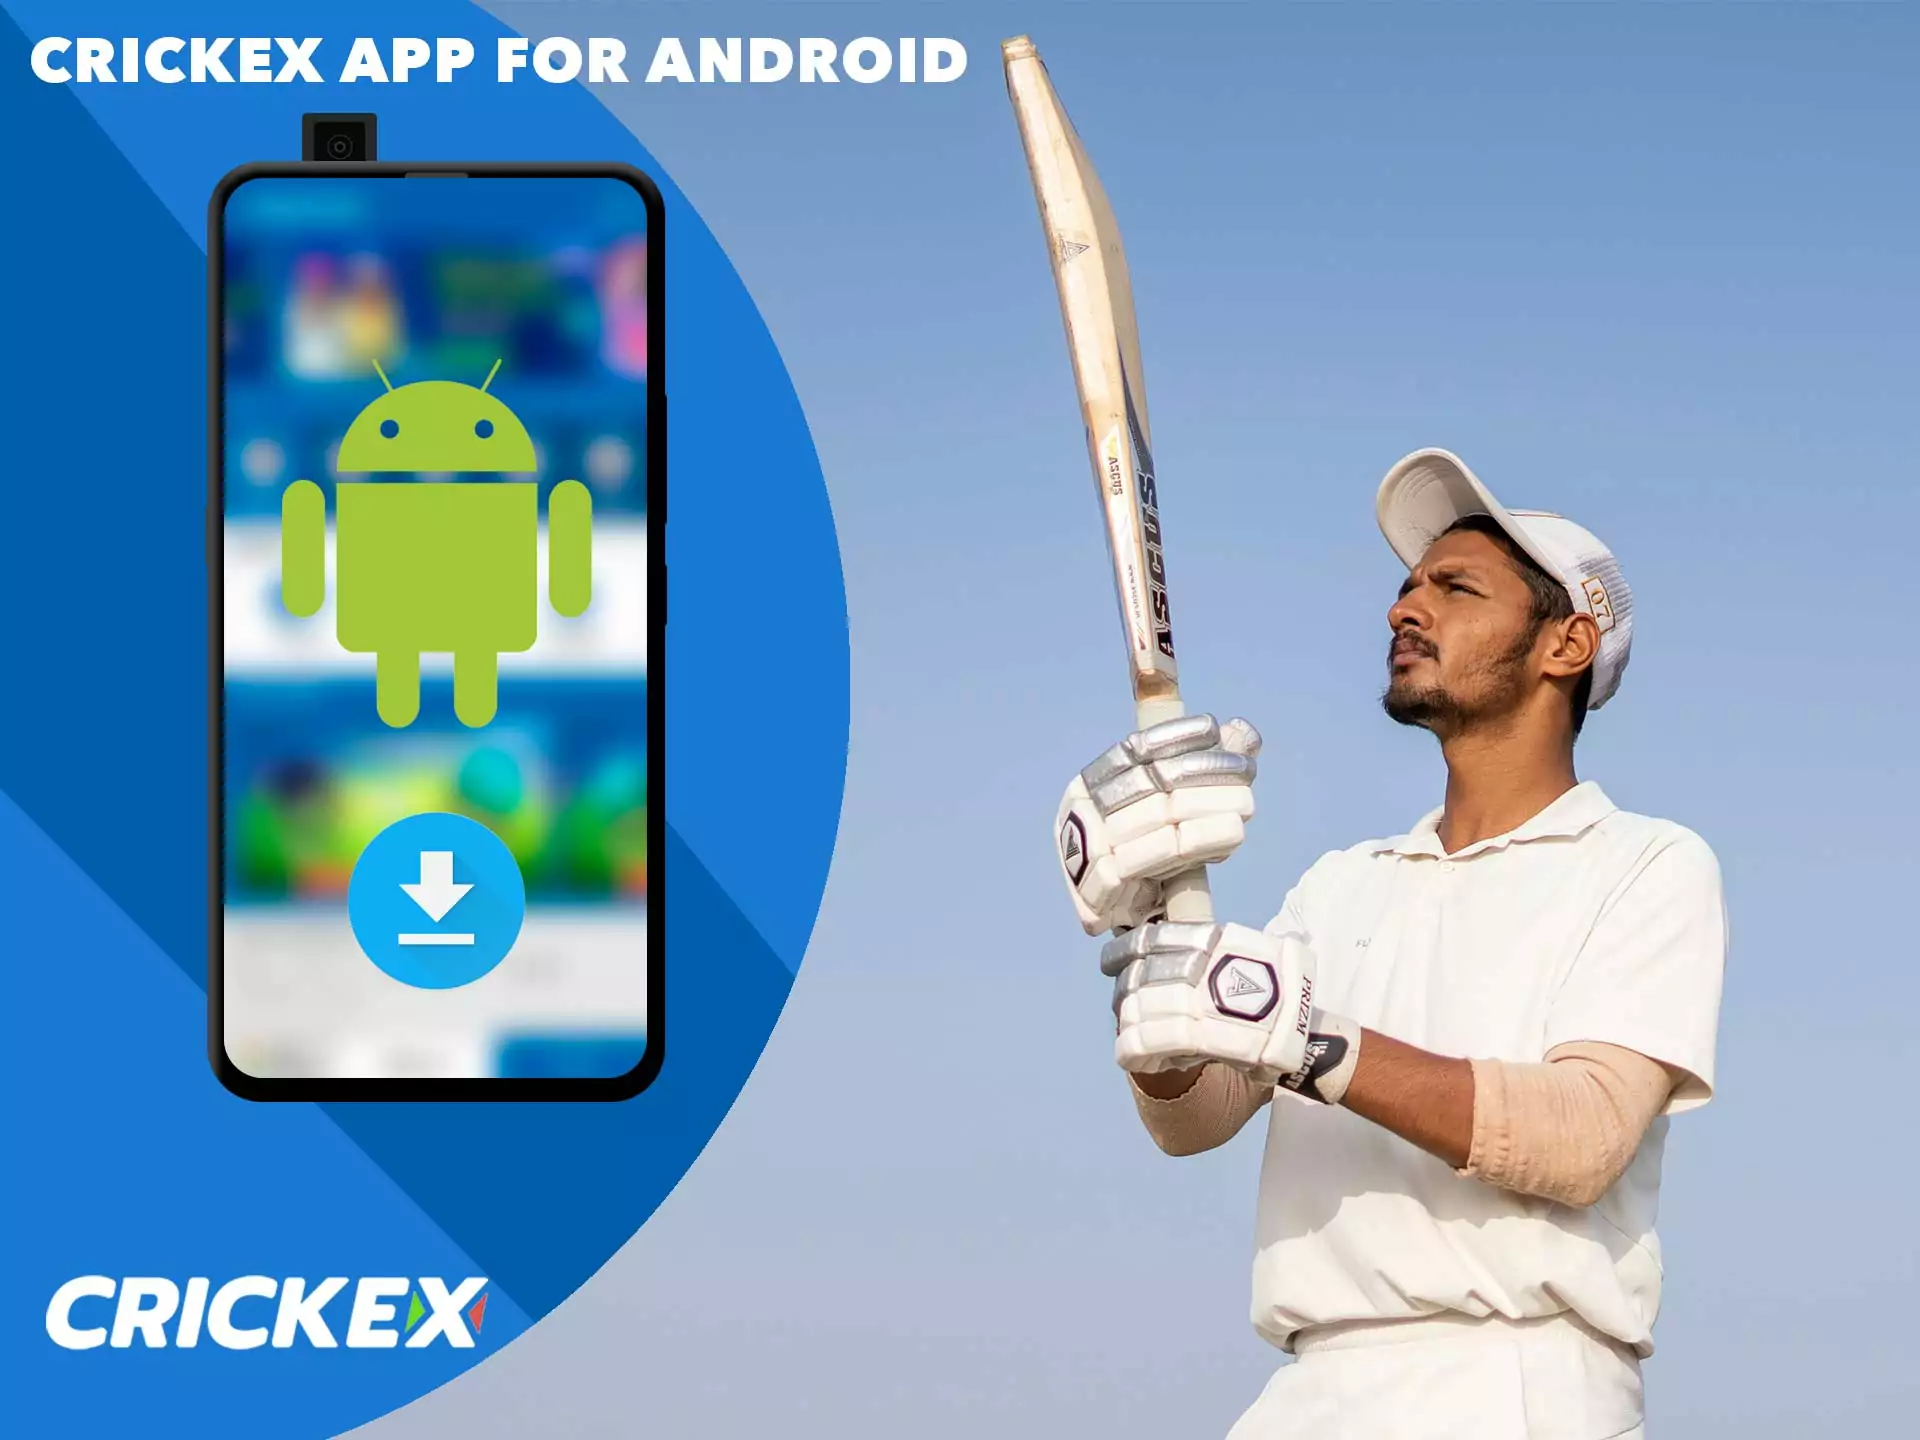 You can download the Crickex app for Android for free.